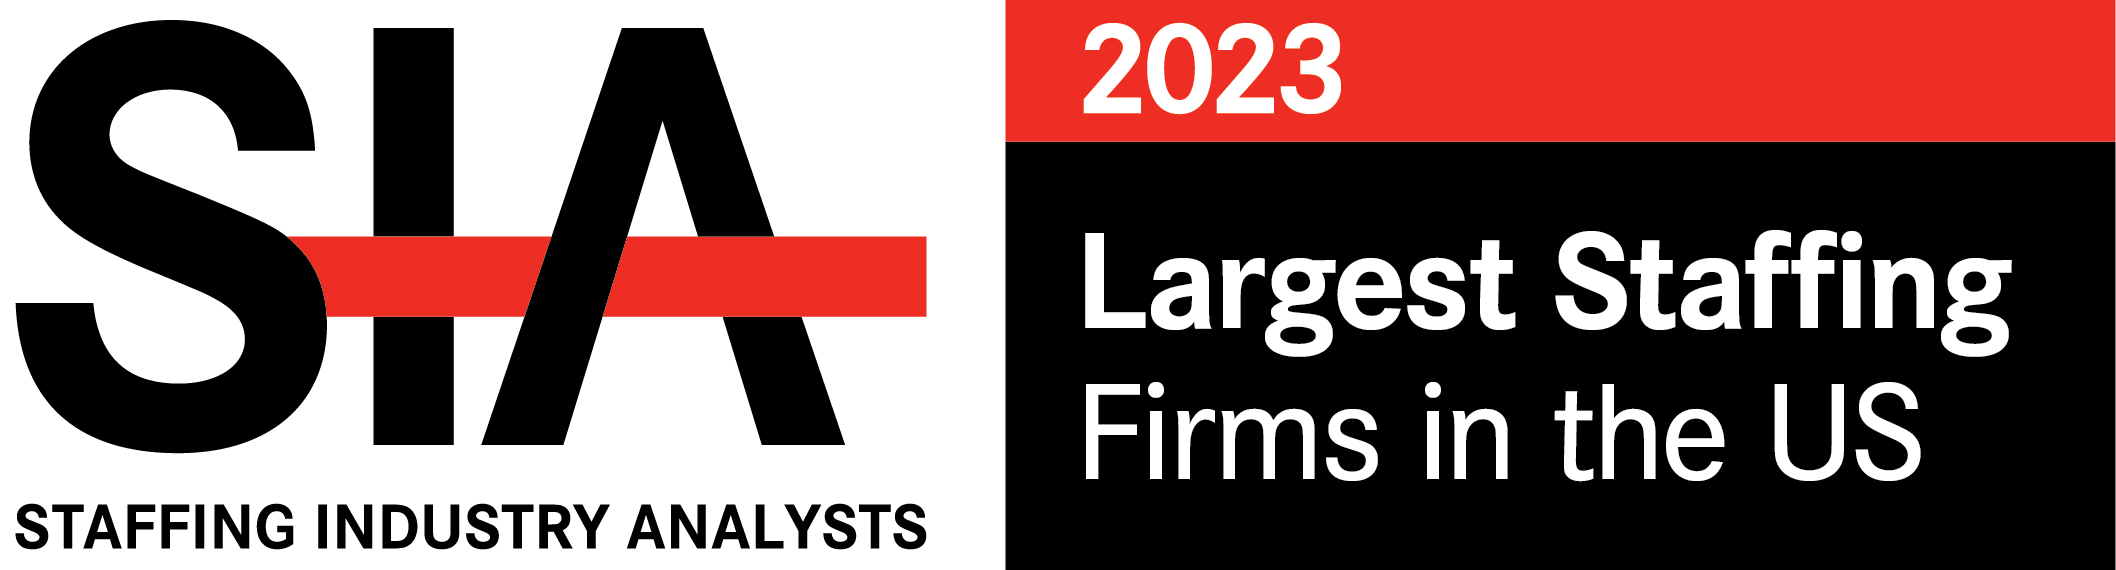 Staffing Industry Analysts Largest Staffing Firms in U.S. Logo